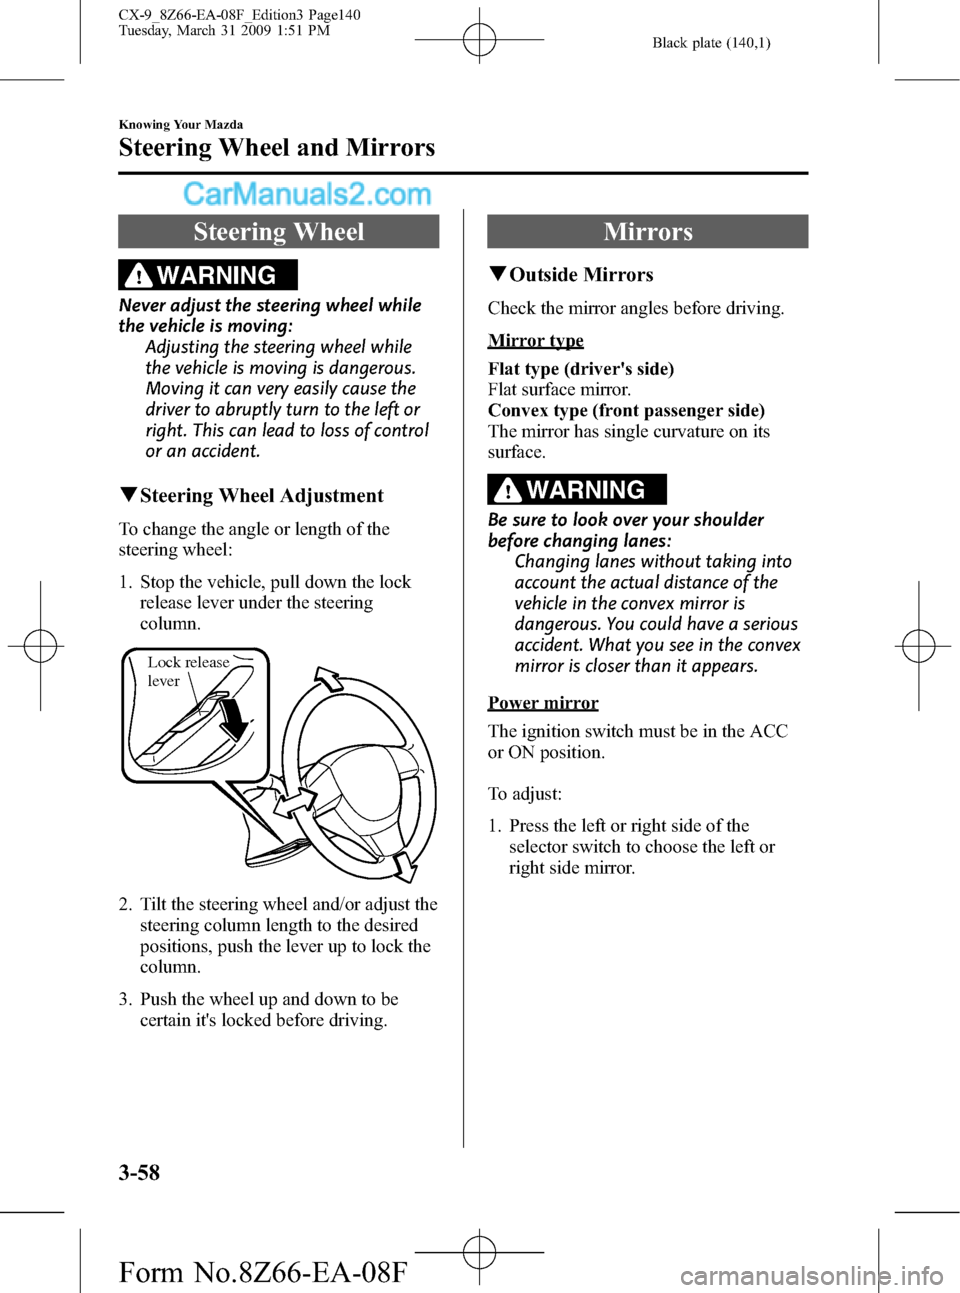 MAZDA MODEL CX-9 2009  Owners Manual (in English) Black plate (140,1)
Steering Wheel
WARNING
Never adjust the steering wheel while
the vehicle is moving:
Adjusting the steering wheel while
the vehicle is moving is dangerous.
Moving it can very easily